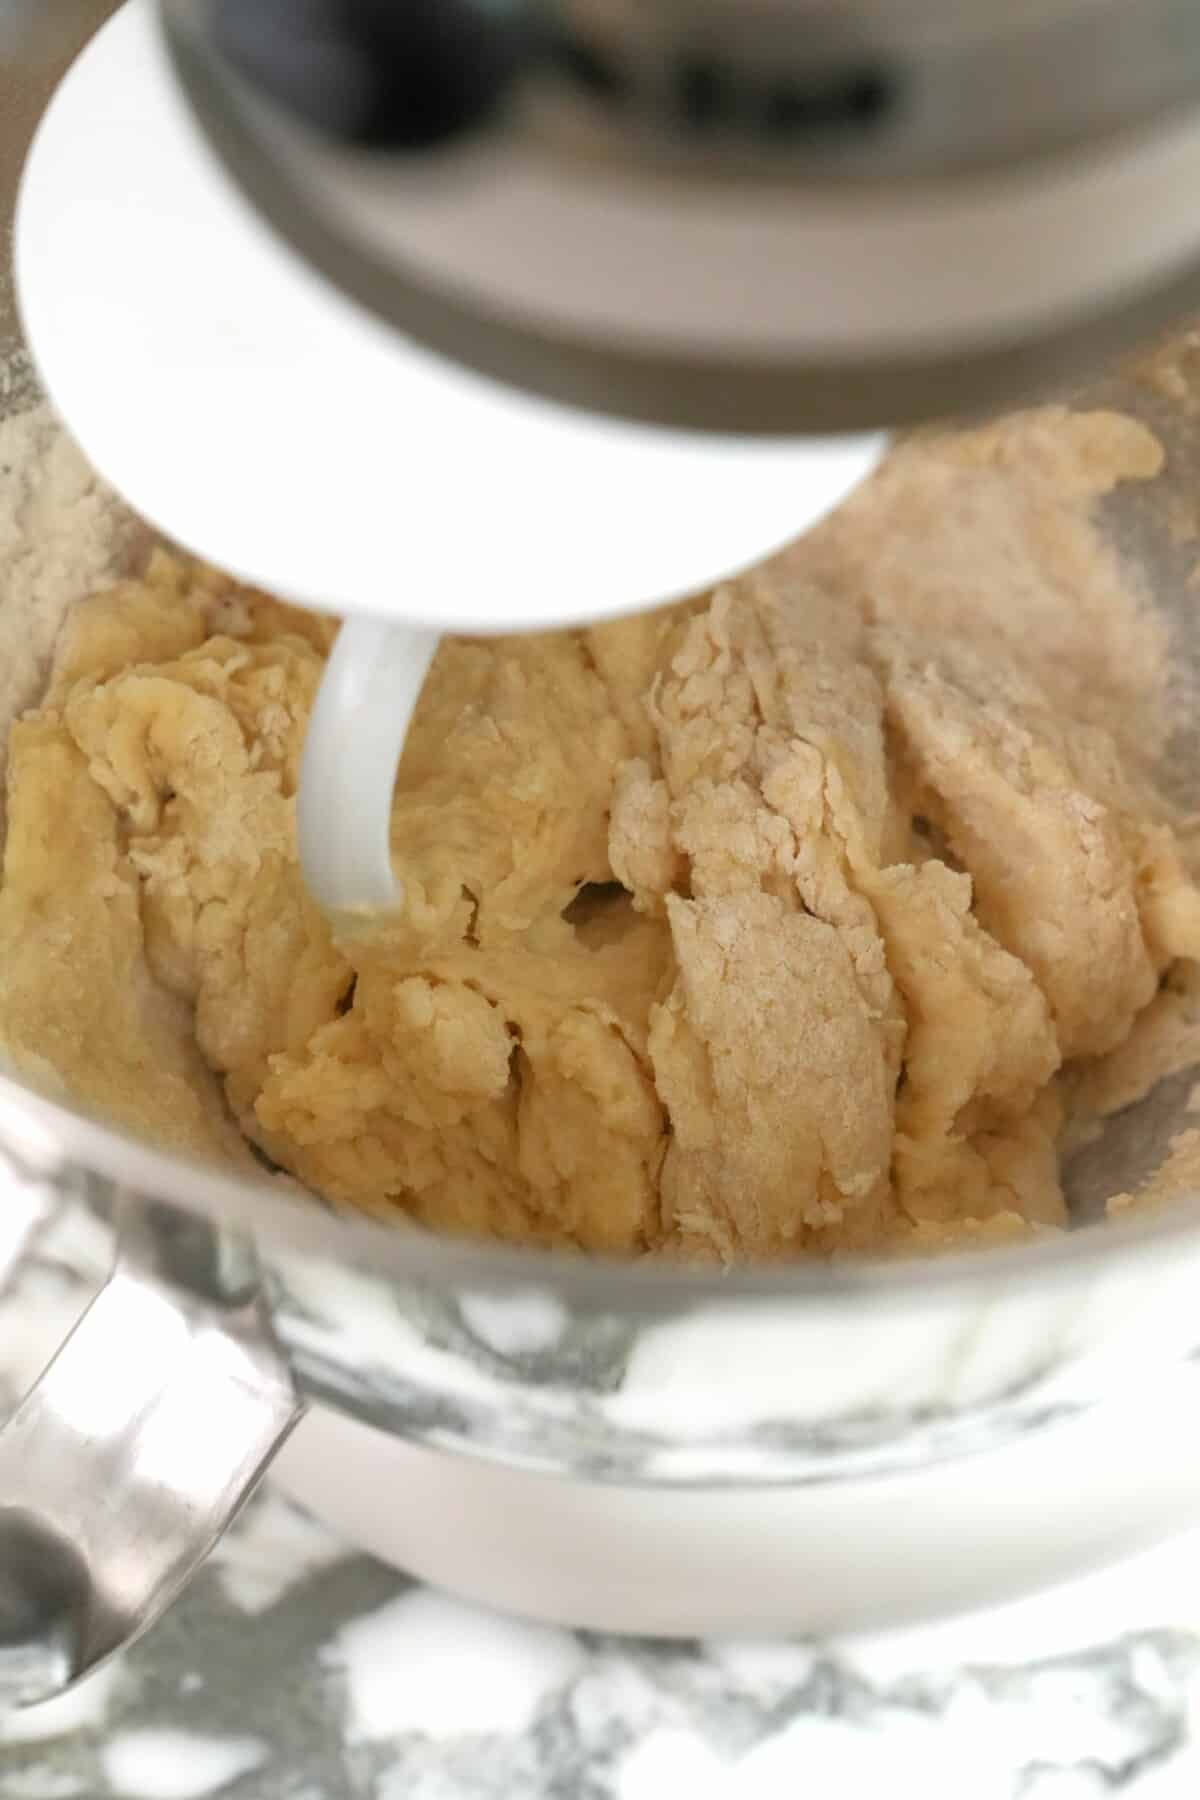 Milk bread dough mixing in a stand mixer.